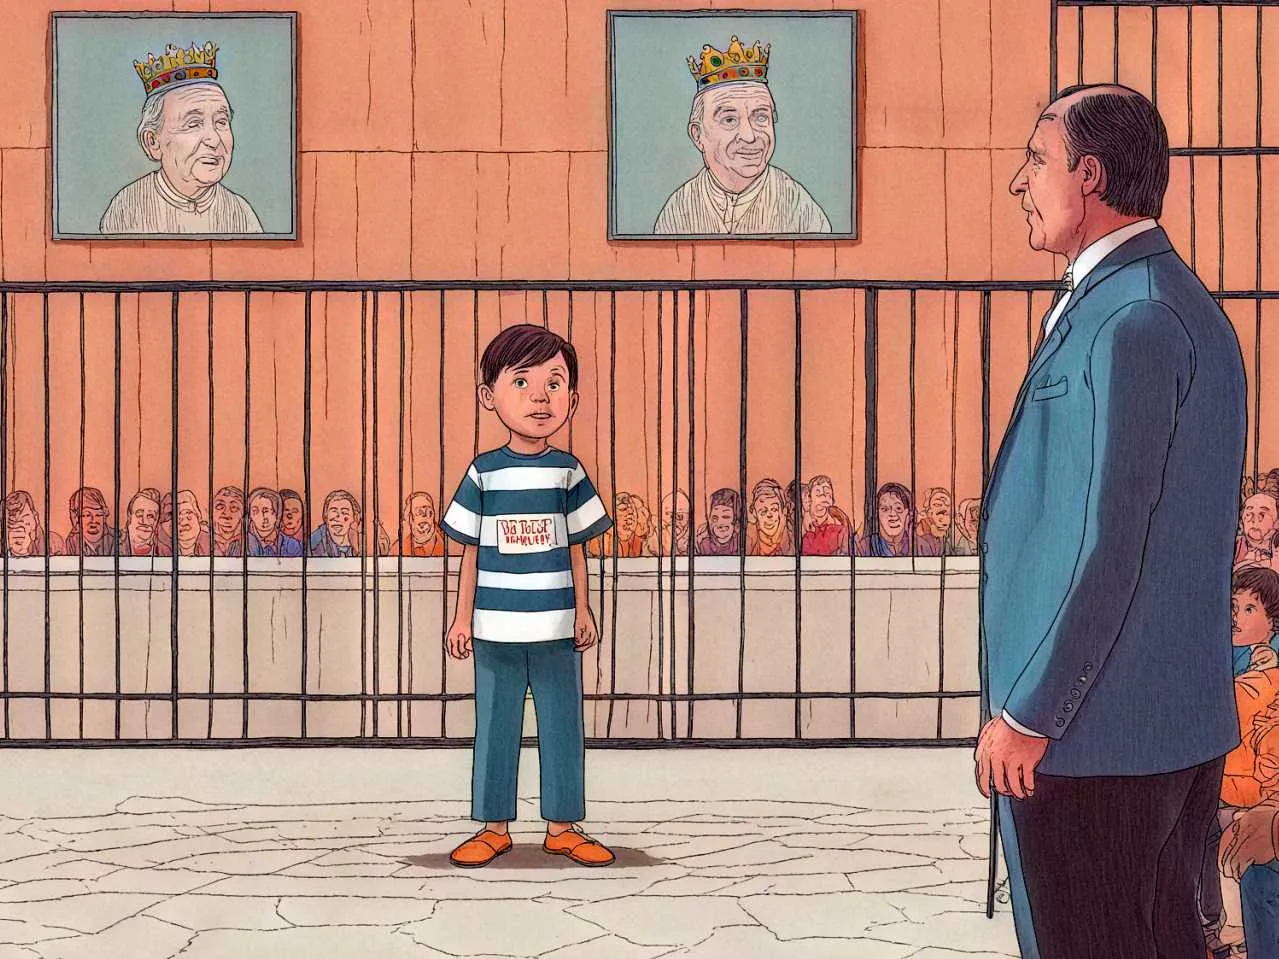 cartoon image of a boy in court